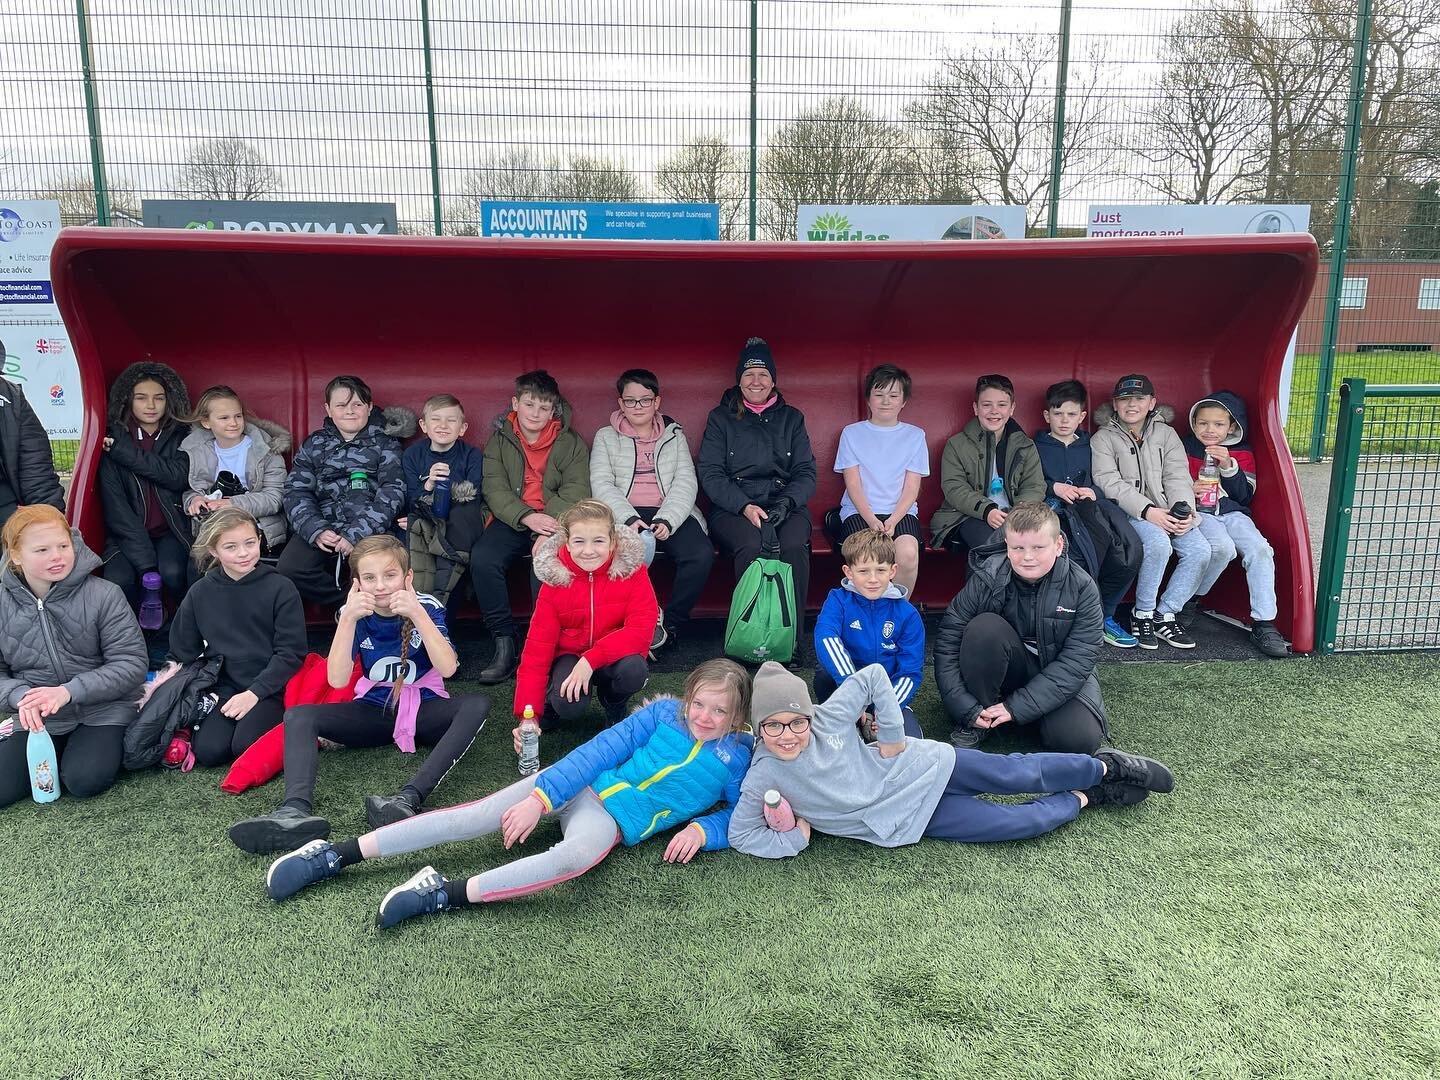 Skipsea students had a fantastic morning on the HSLC 3G pitch playing football. It was very windy but we had a brilliant time - lots of very happy, very tired children asking &ldquo;When can we do it again?&rdquo; Huge thanks to HSLC and the sports l